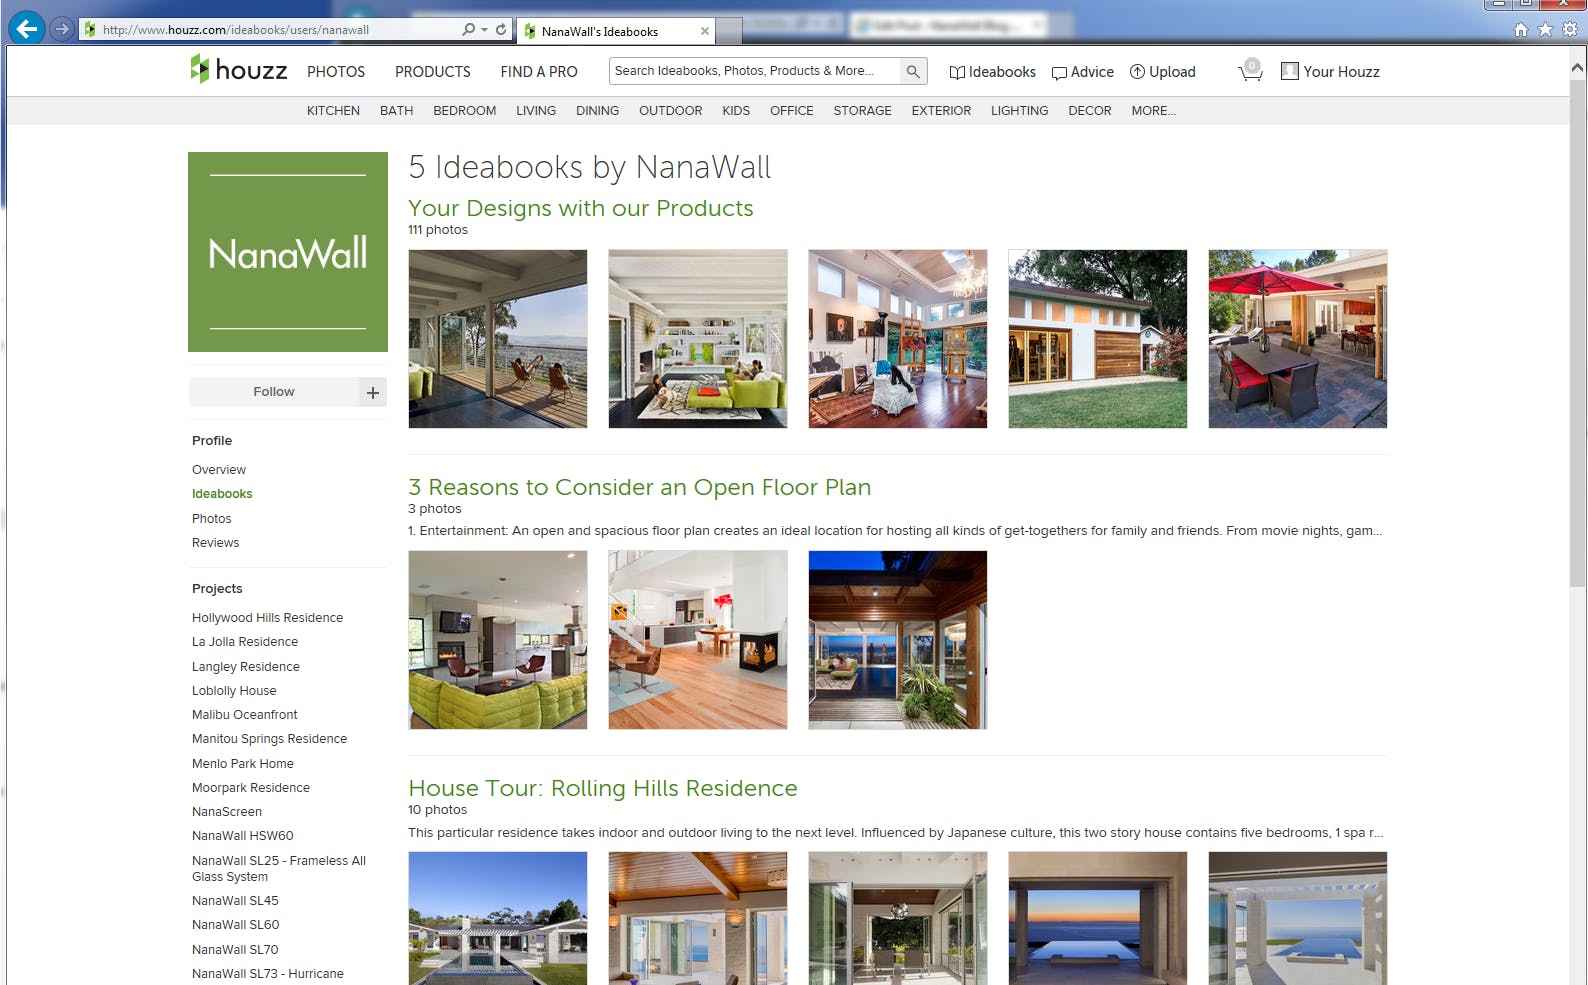 Design professionals provide NanaWall reviews in Houzz